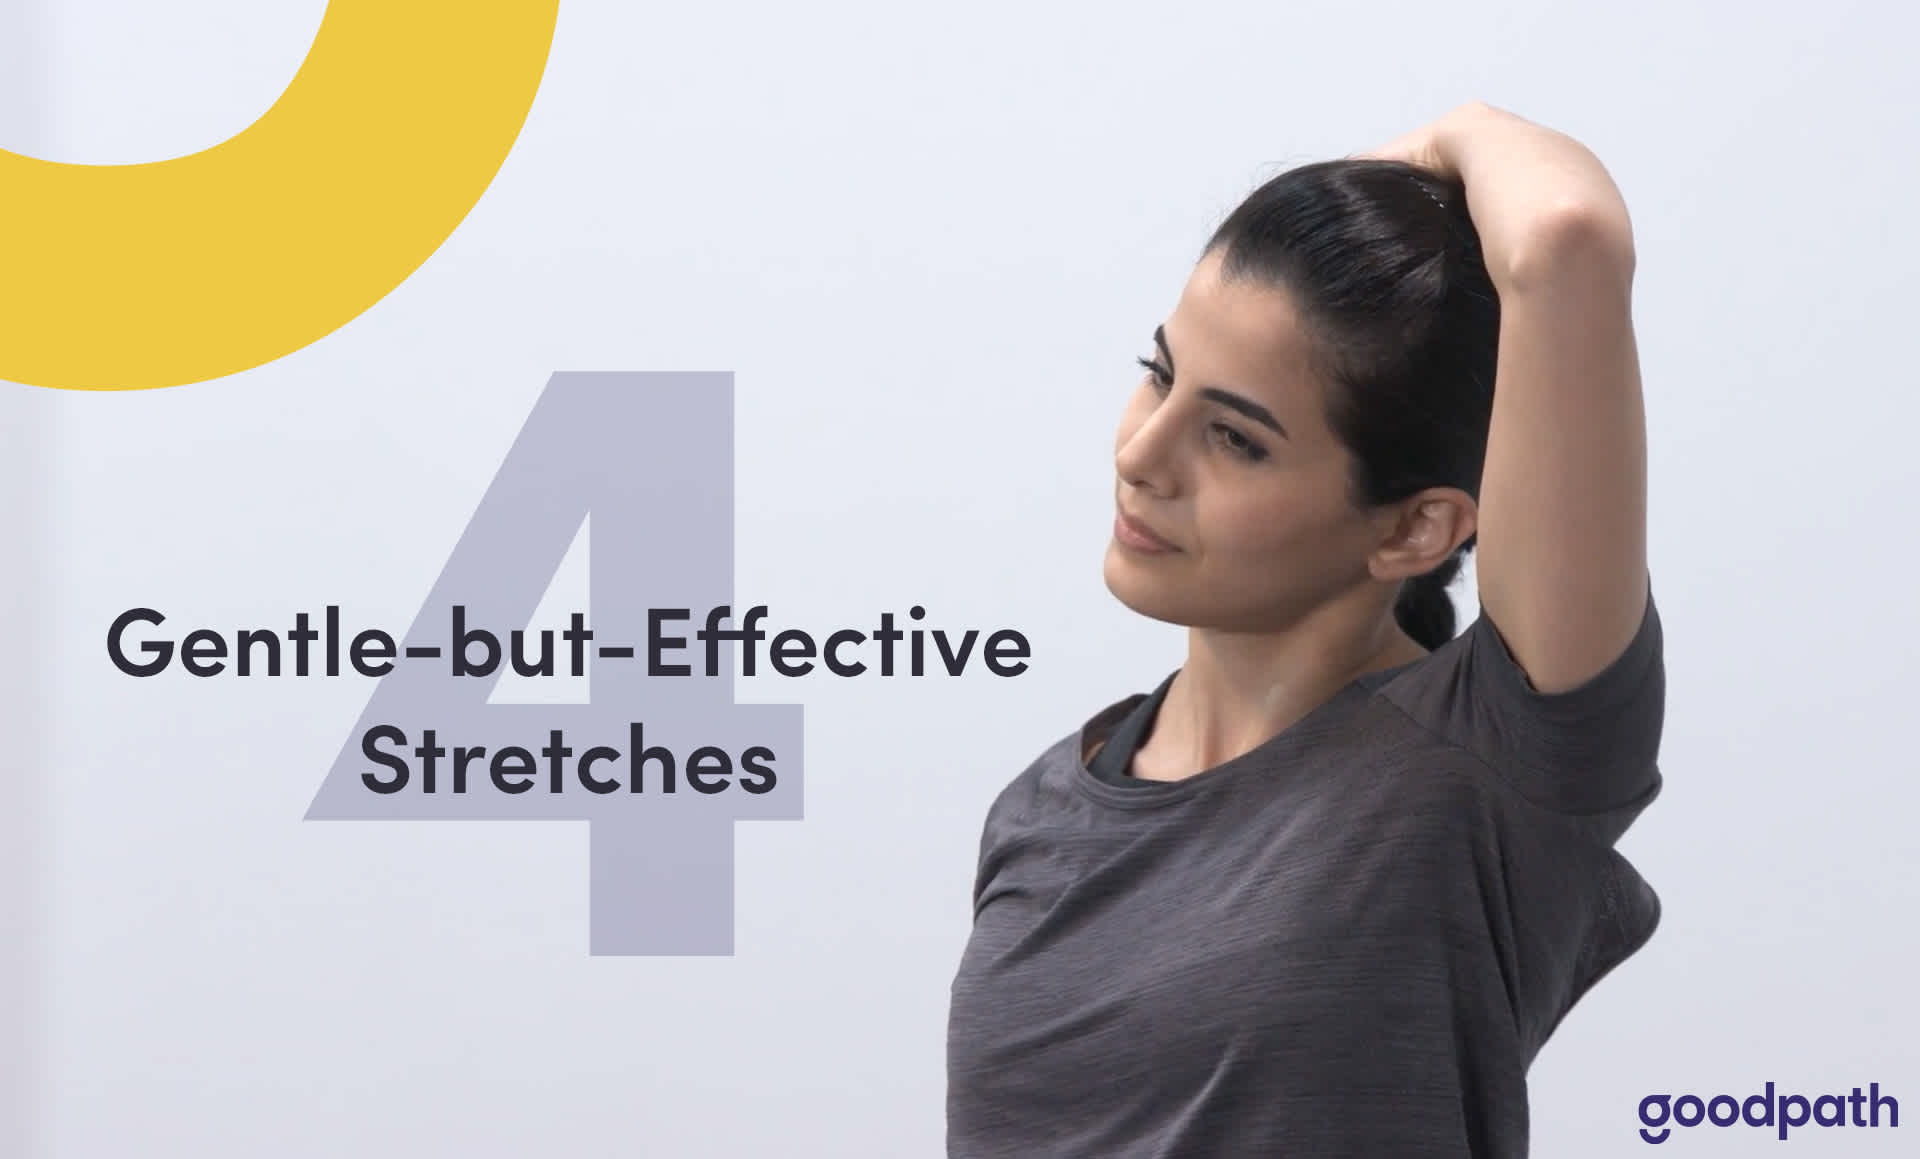 Neck Pain Relief: 4 Gentle-but-Effective Stretches